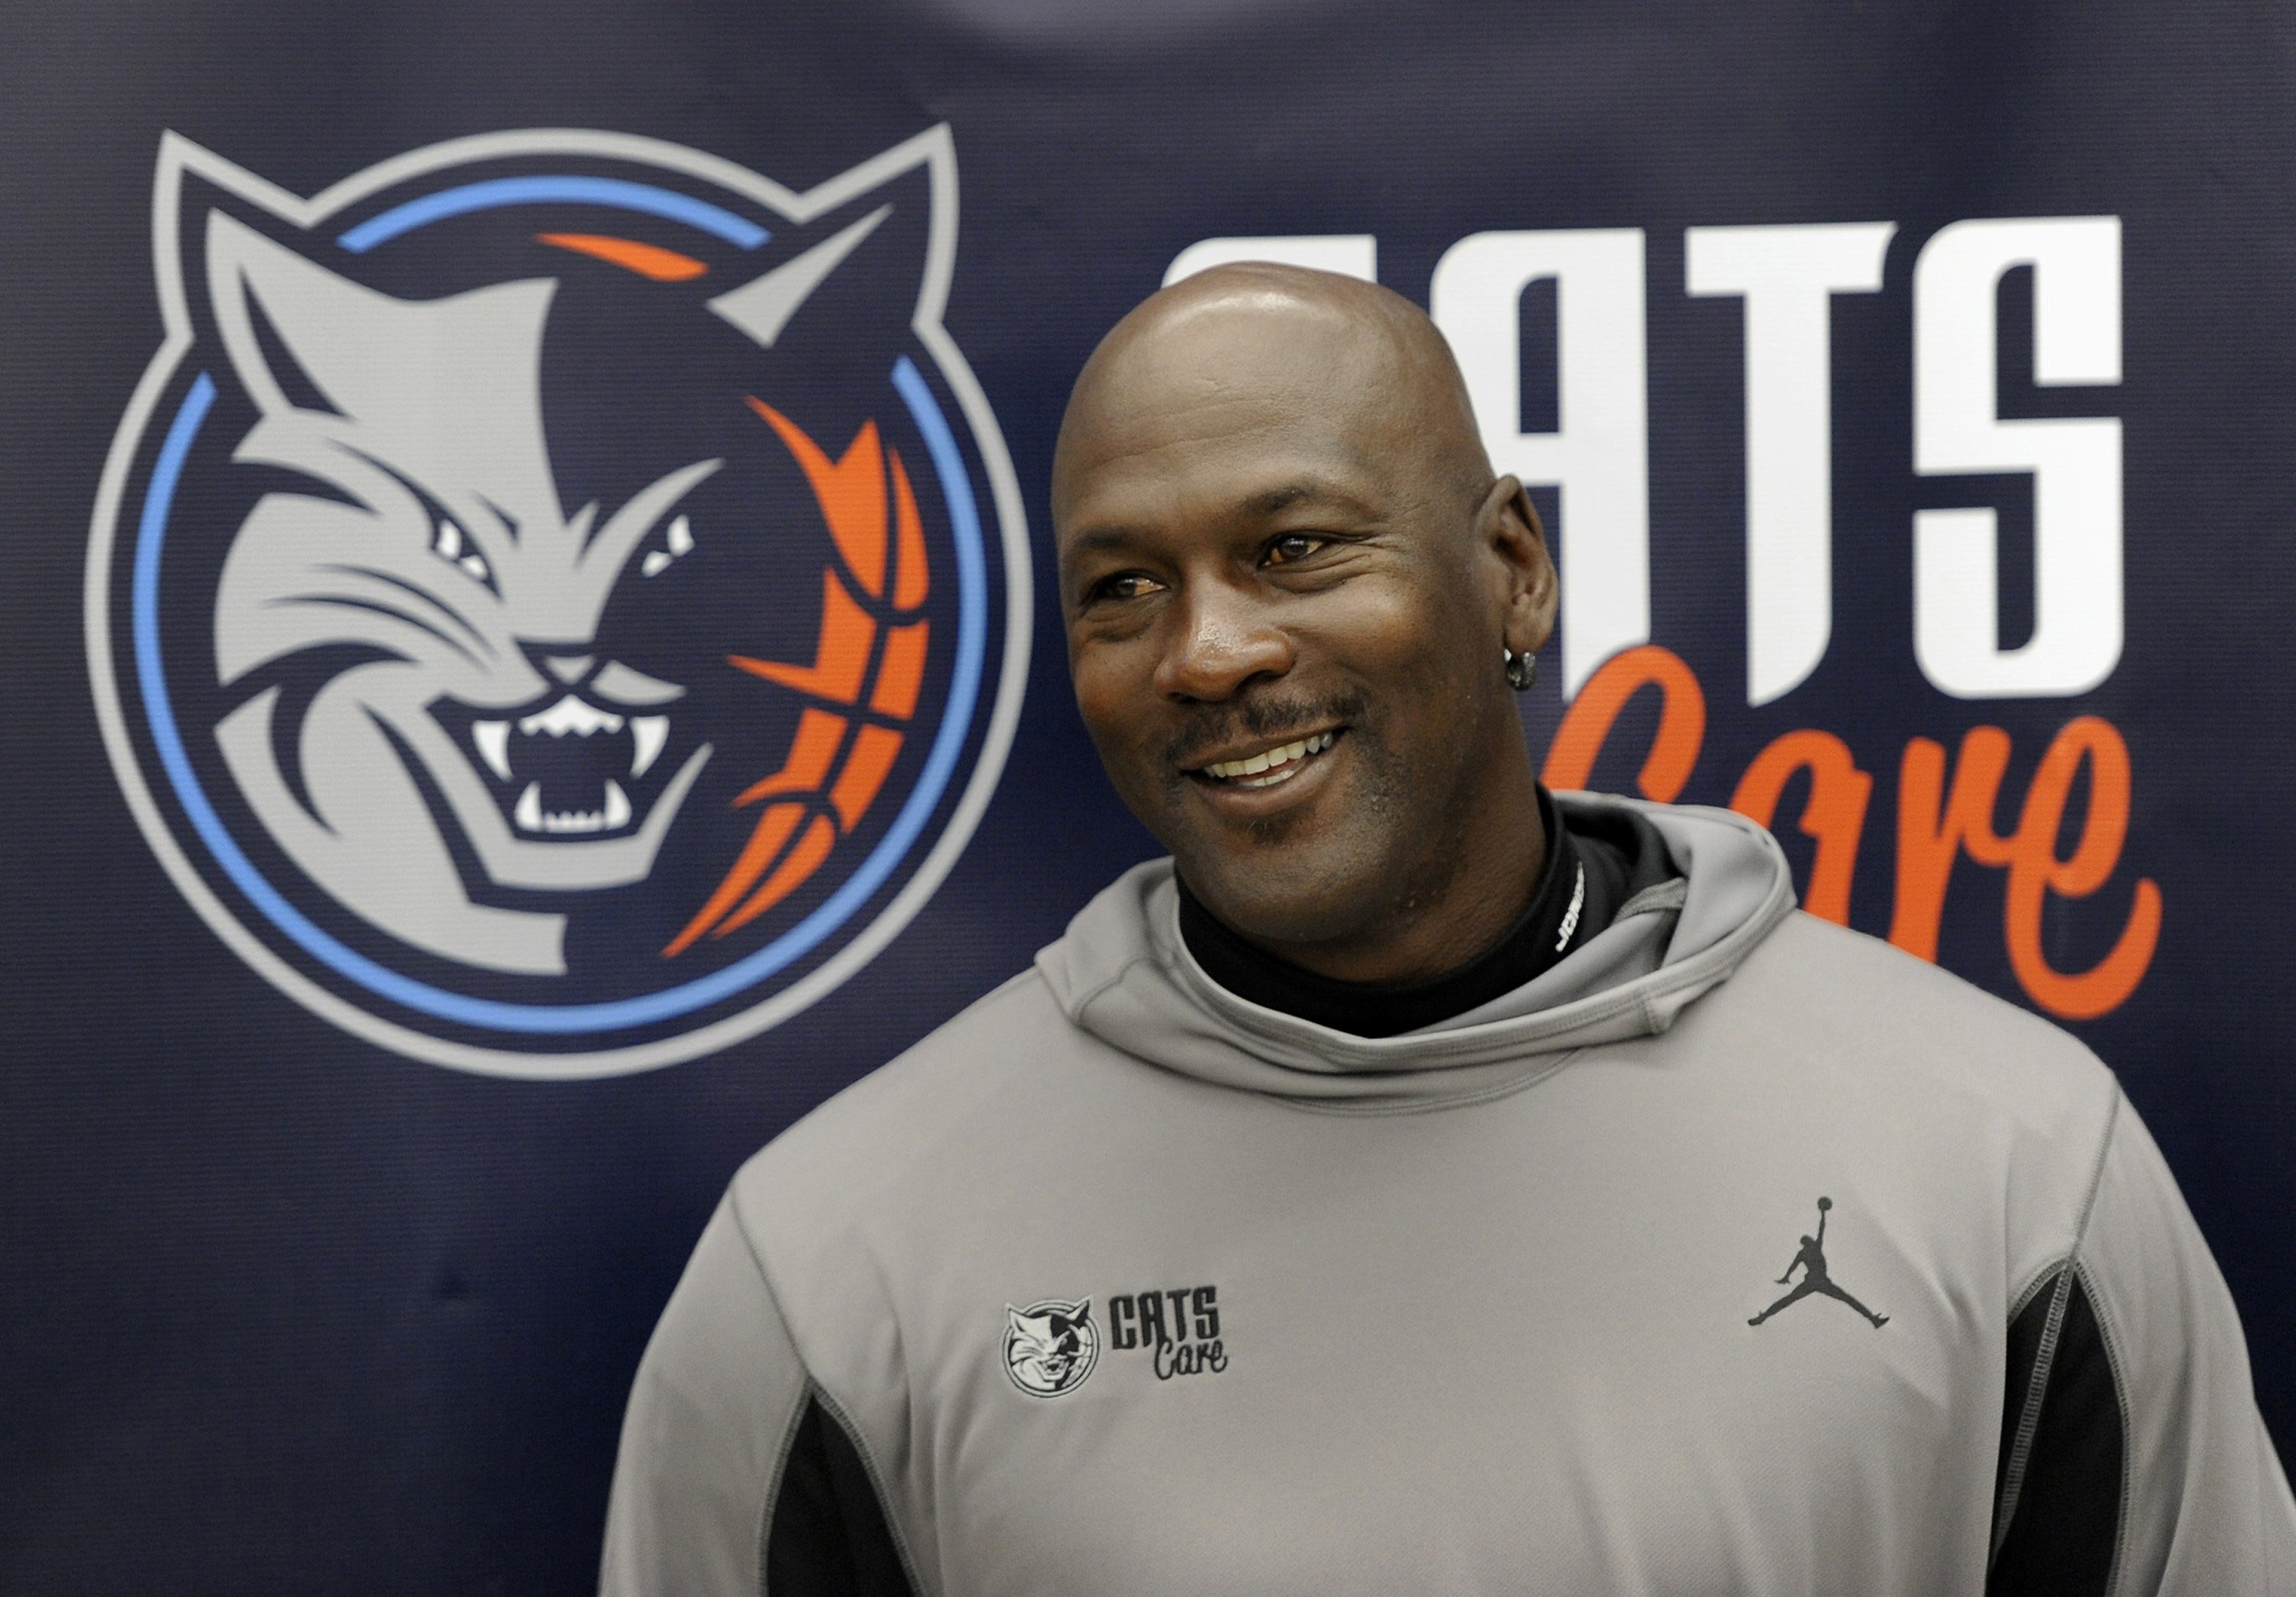 Charlotte Bobcats team owner Michael Jordan smiles during a press conference at West Charlotte High School on Thursday, March 21, 2013. | Source: Getty Images